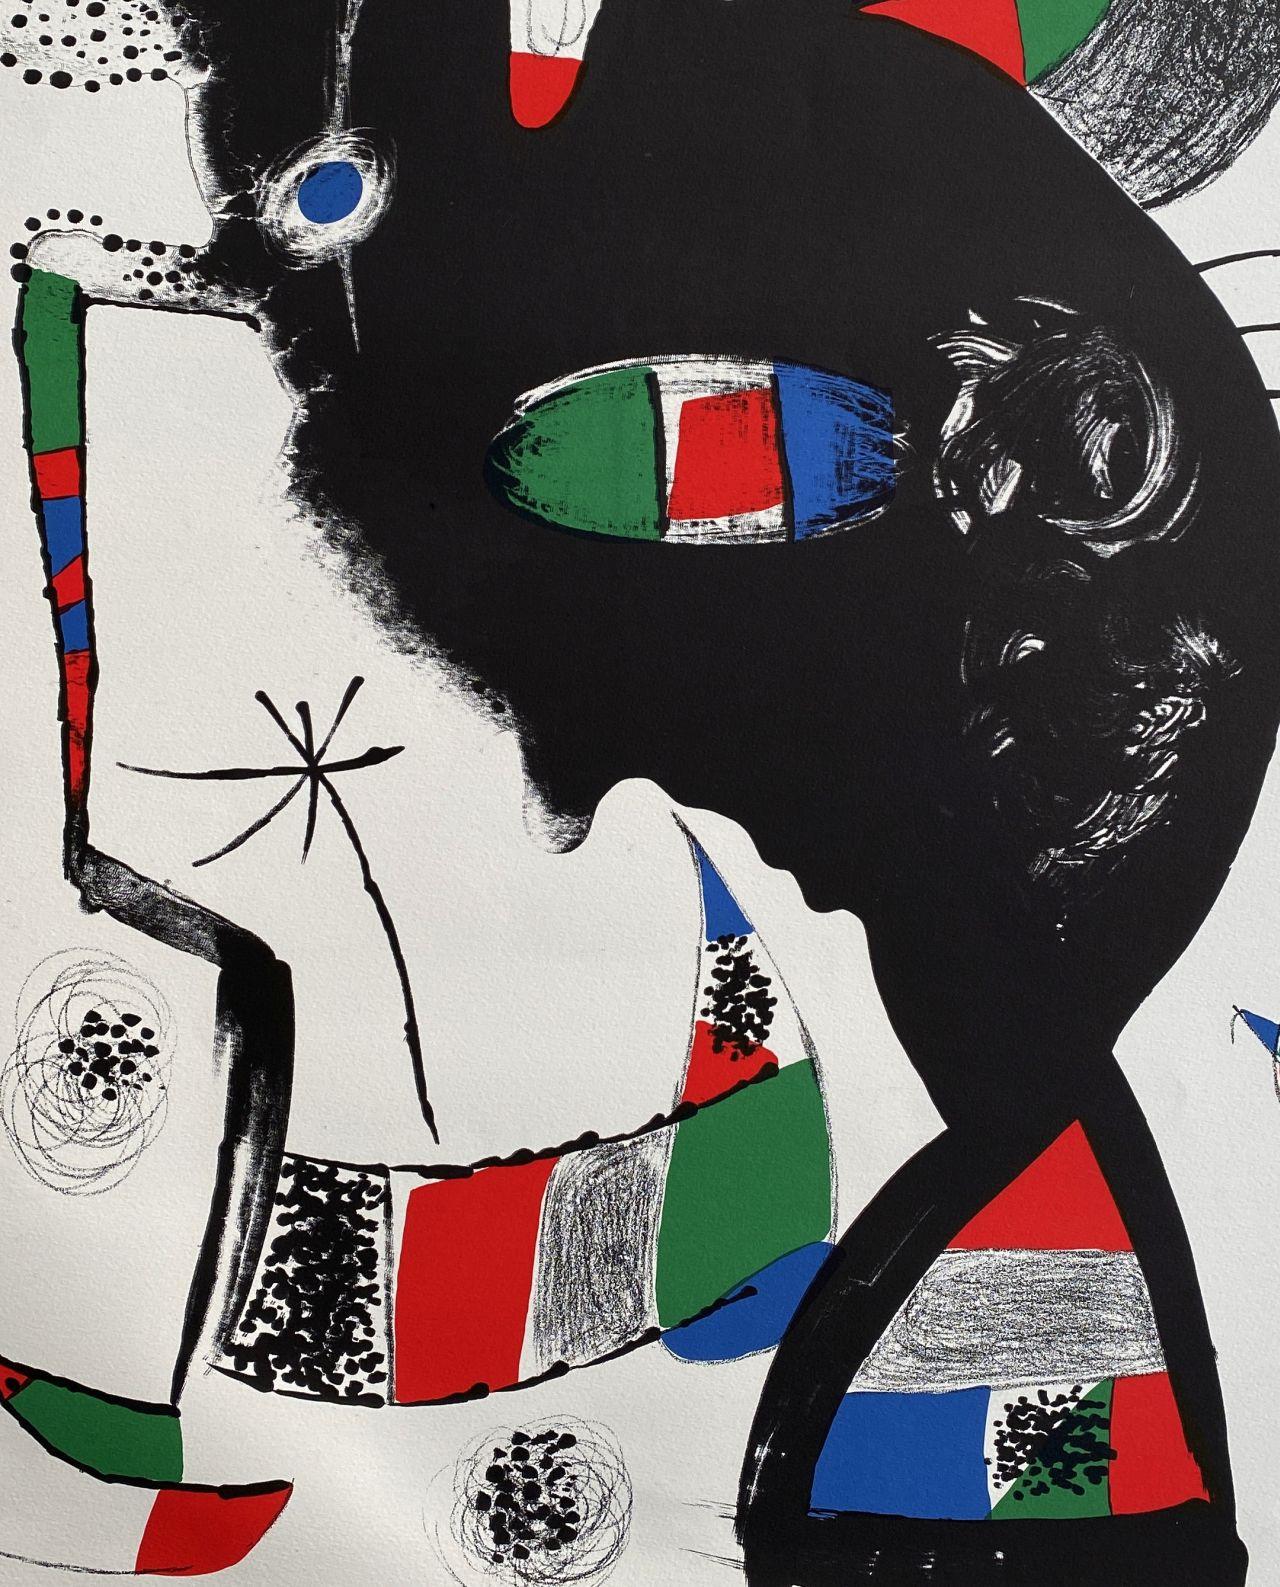 42 rue Blomet - Original Lithograph Handsigned Numbered - 100 copies - Print by Joan Miró